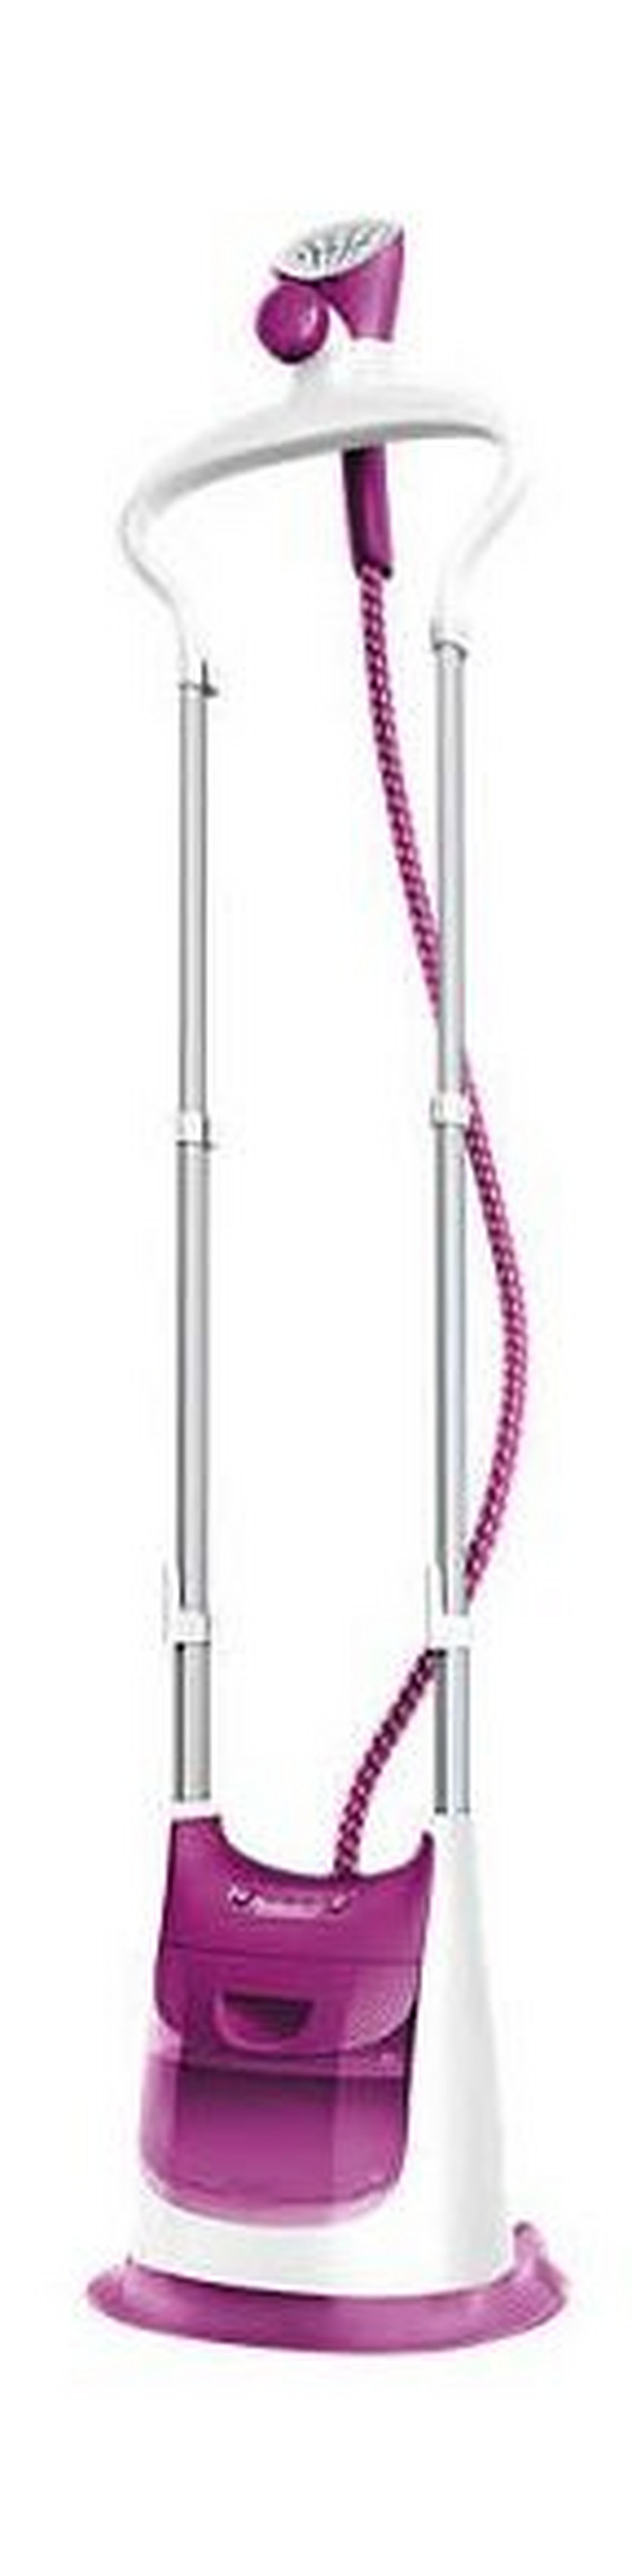 Philips Protouch 2000W  Vertical Steamer (GC612/36) - White, Violet